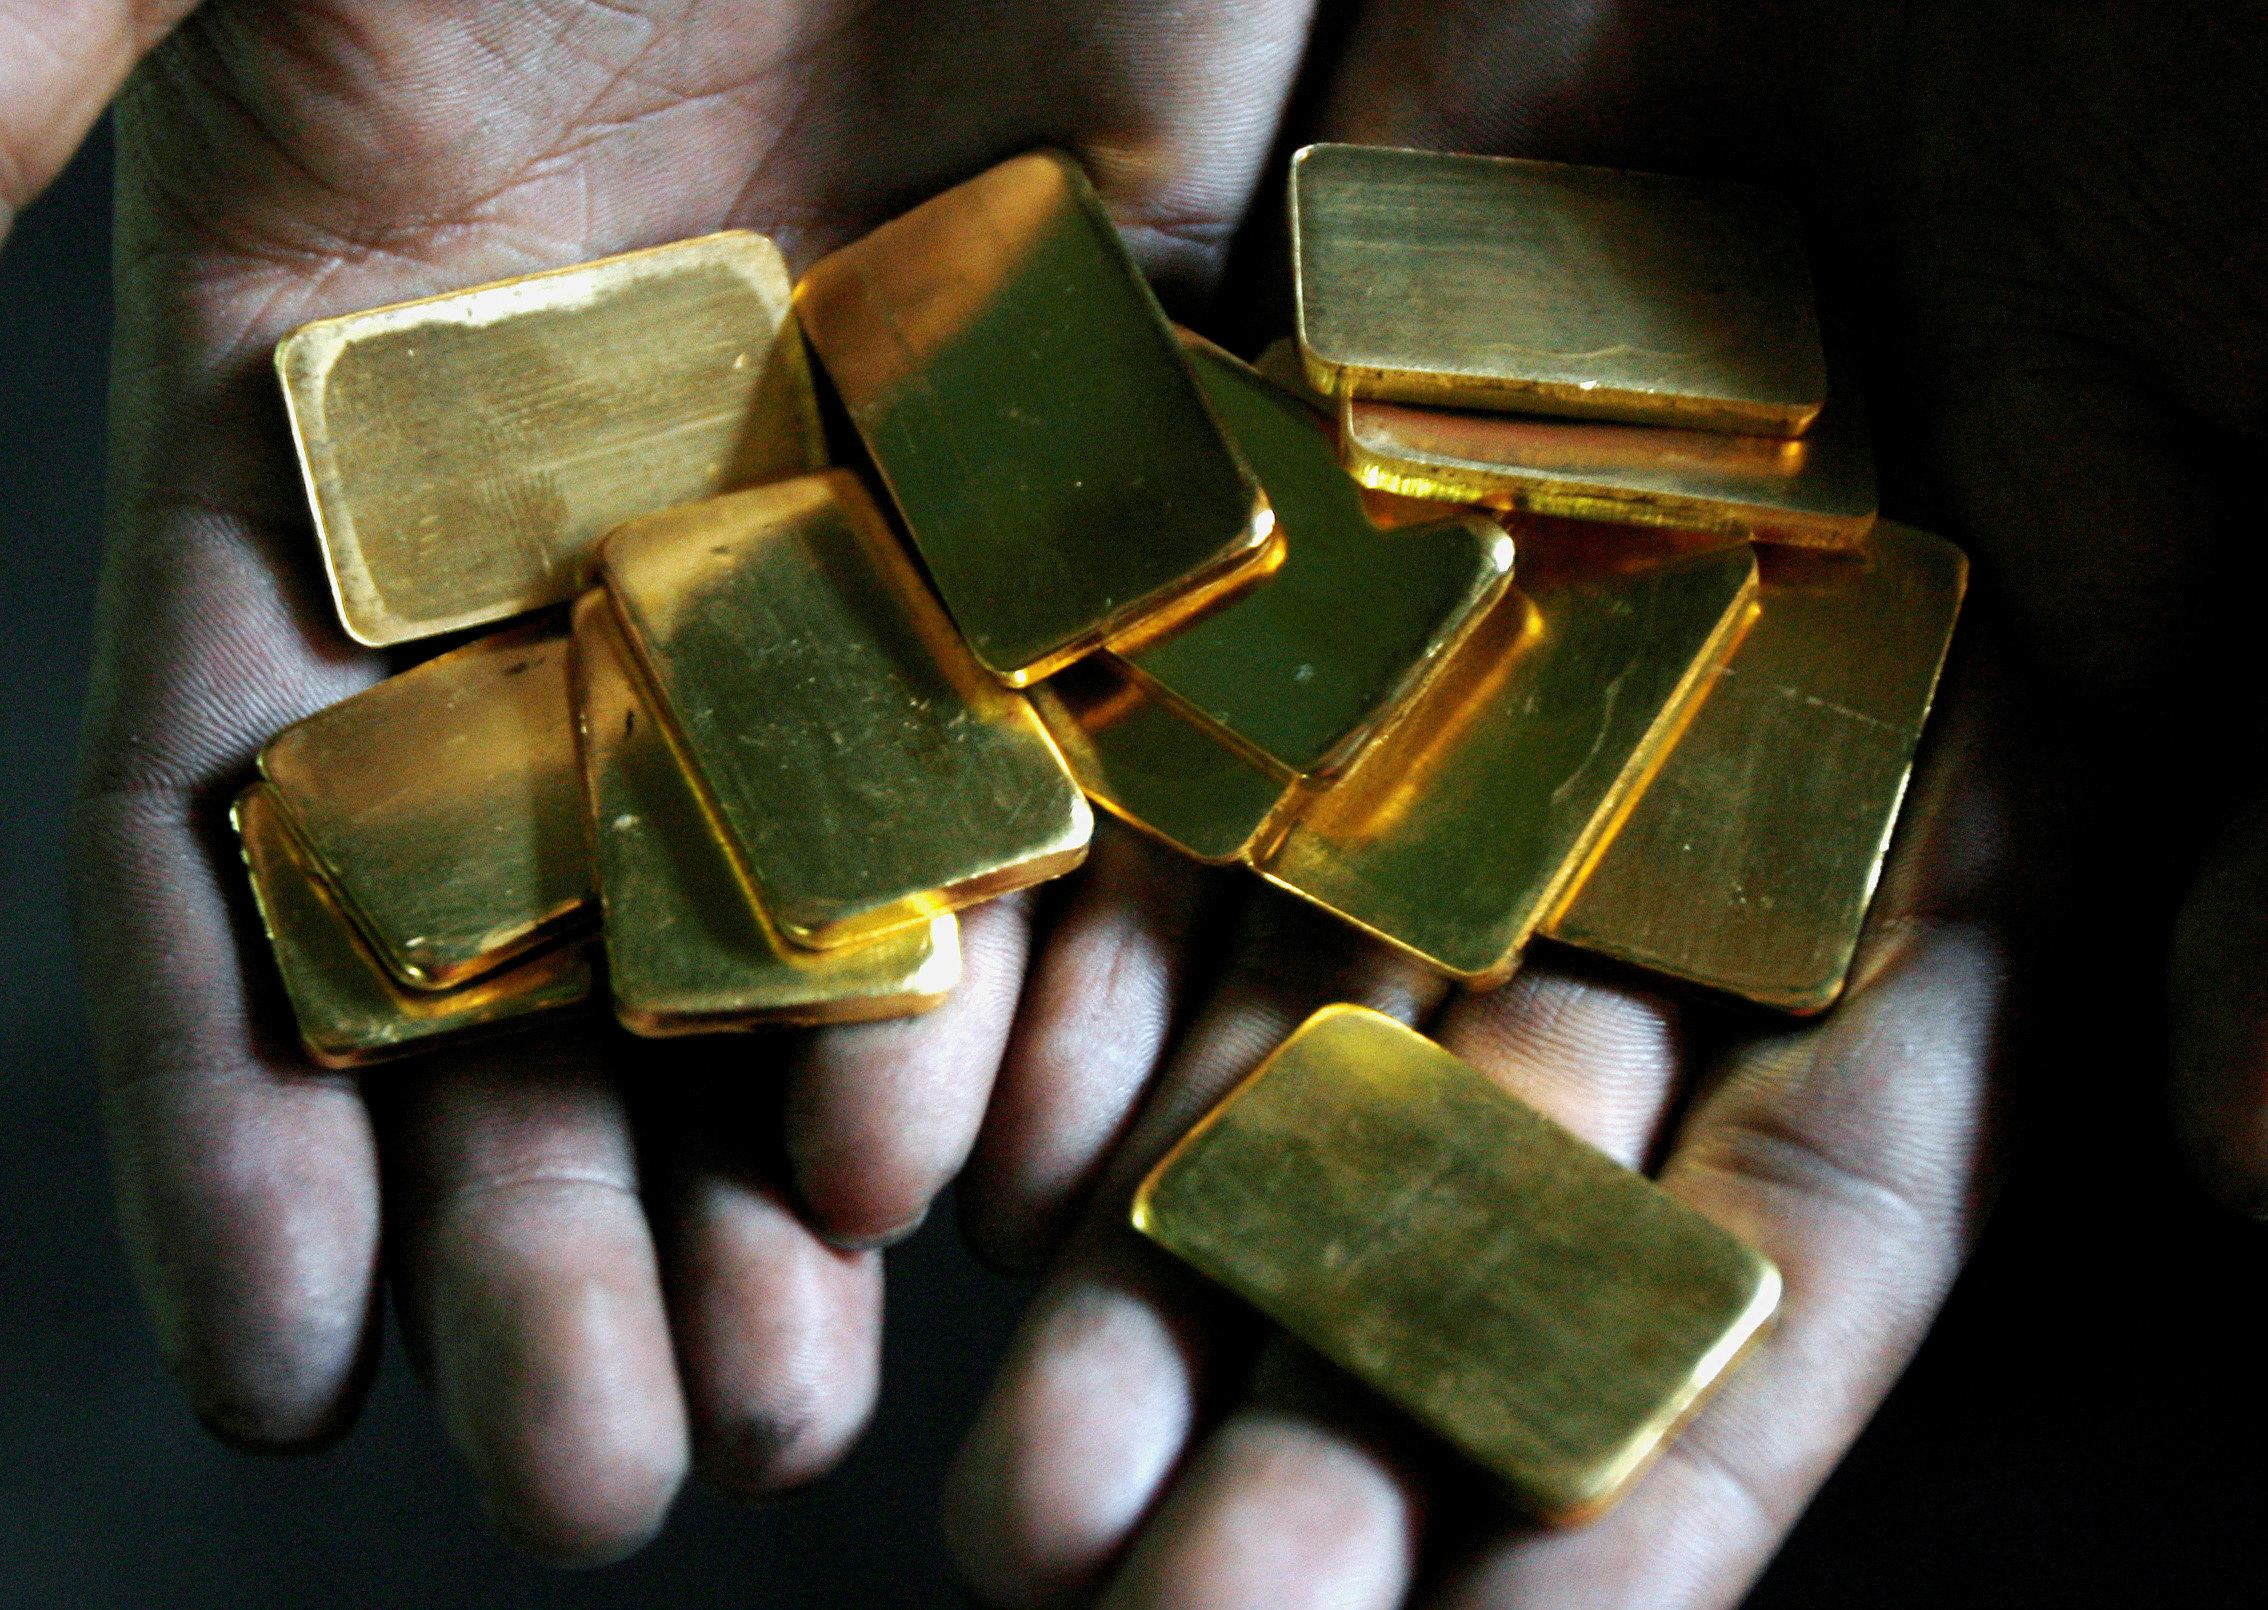 India expected to cut gold import duty to sideline smugglers - sources